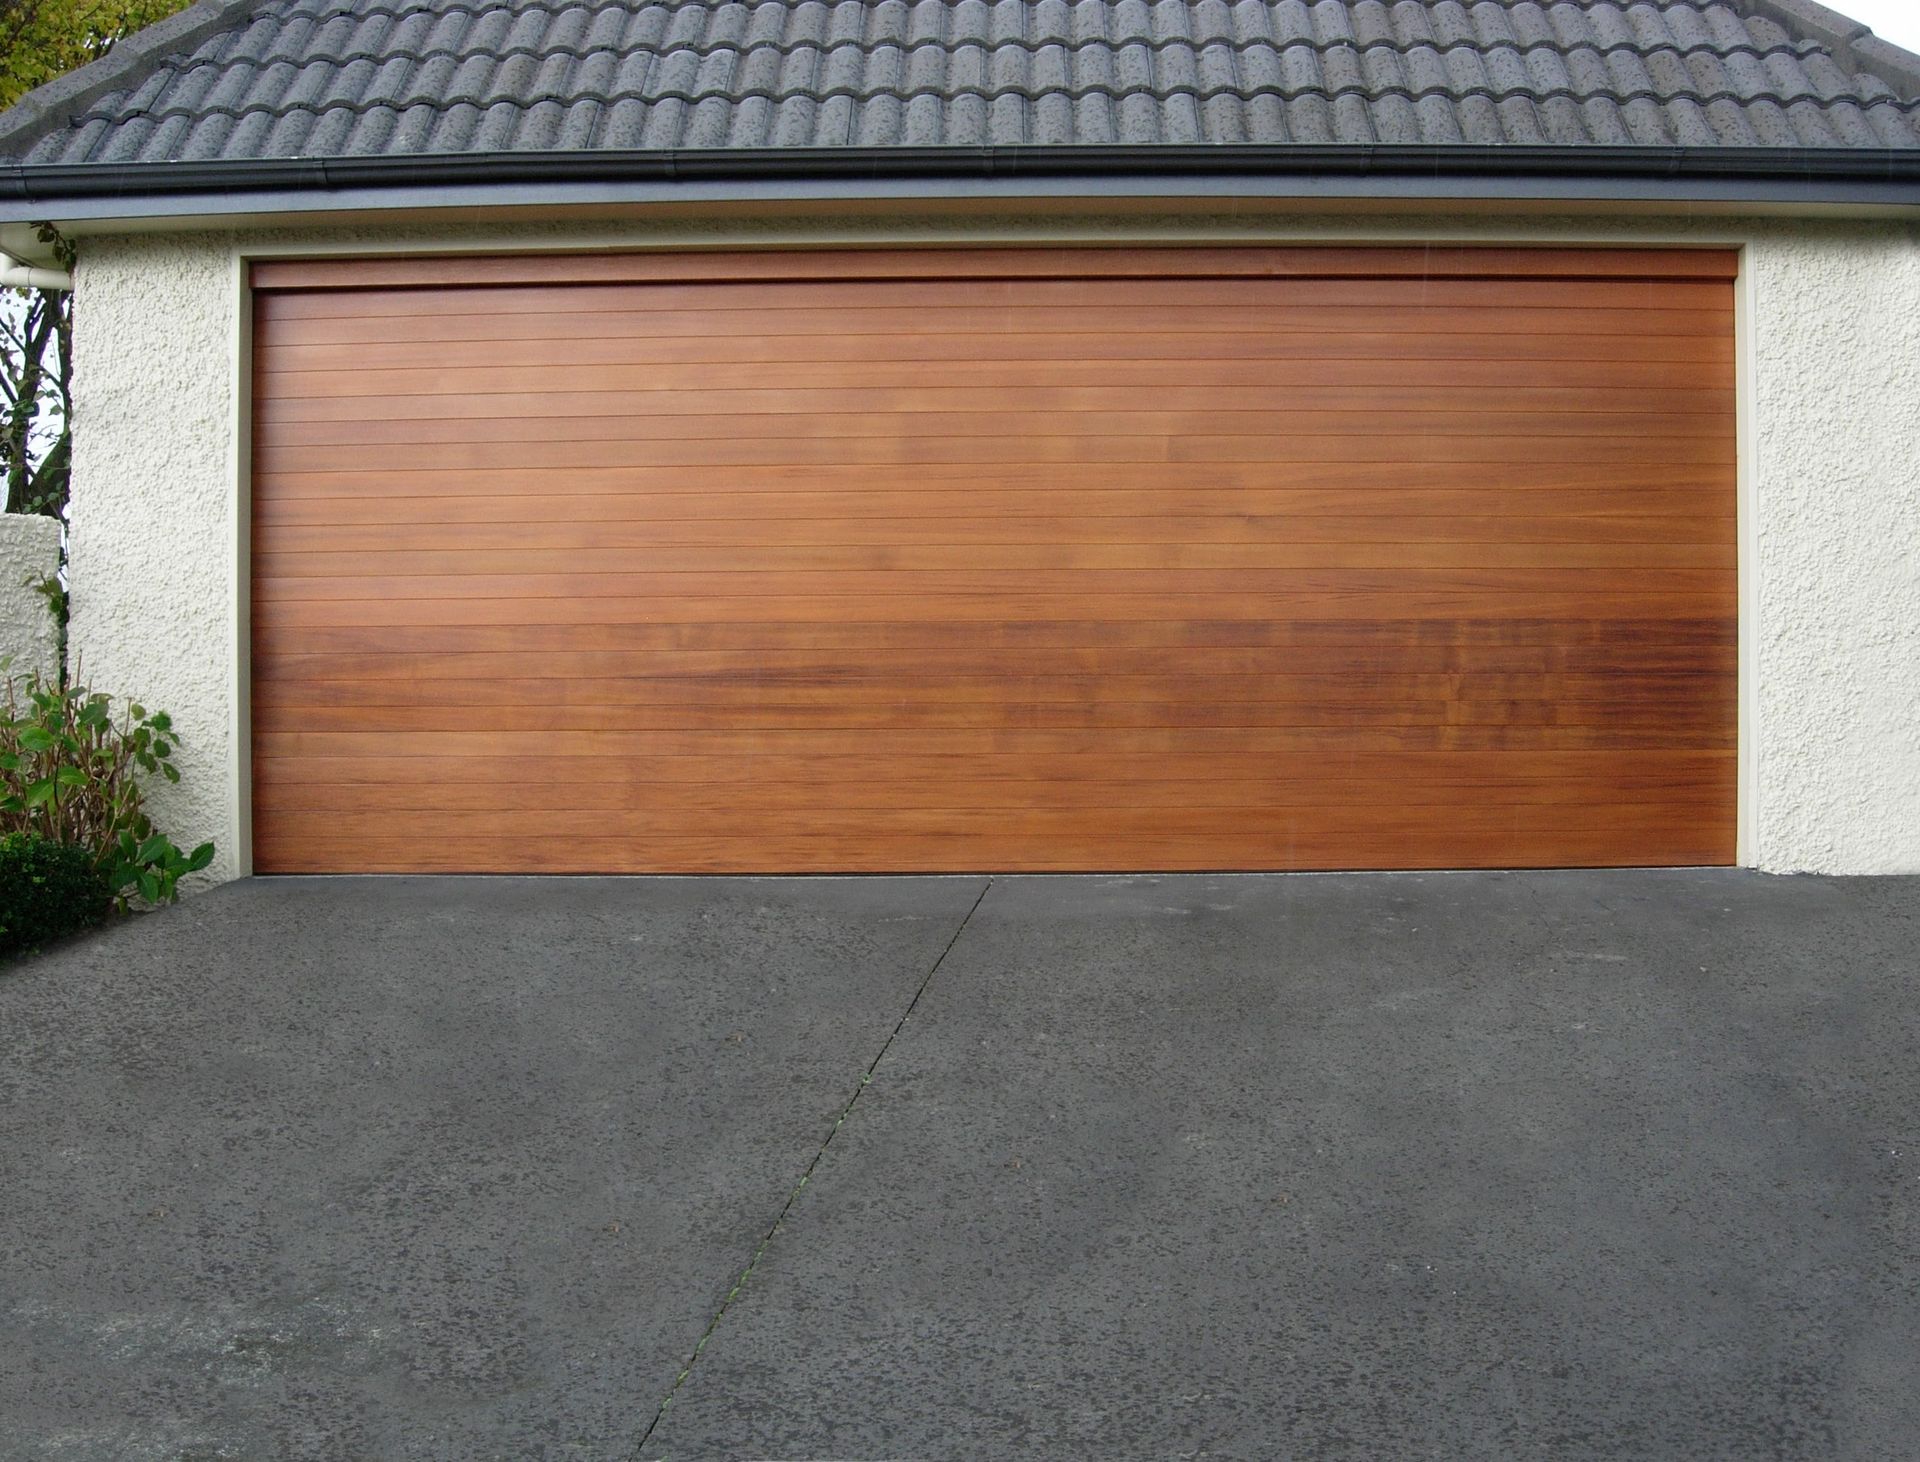 A wooden garage door is sitting in the driveway of a house.